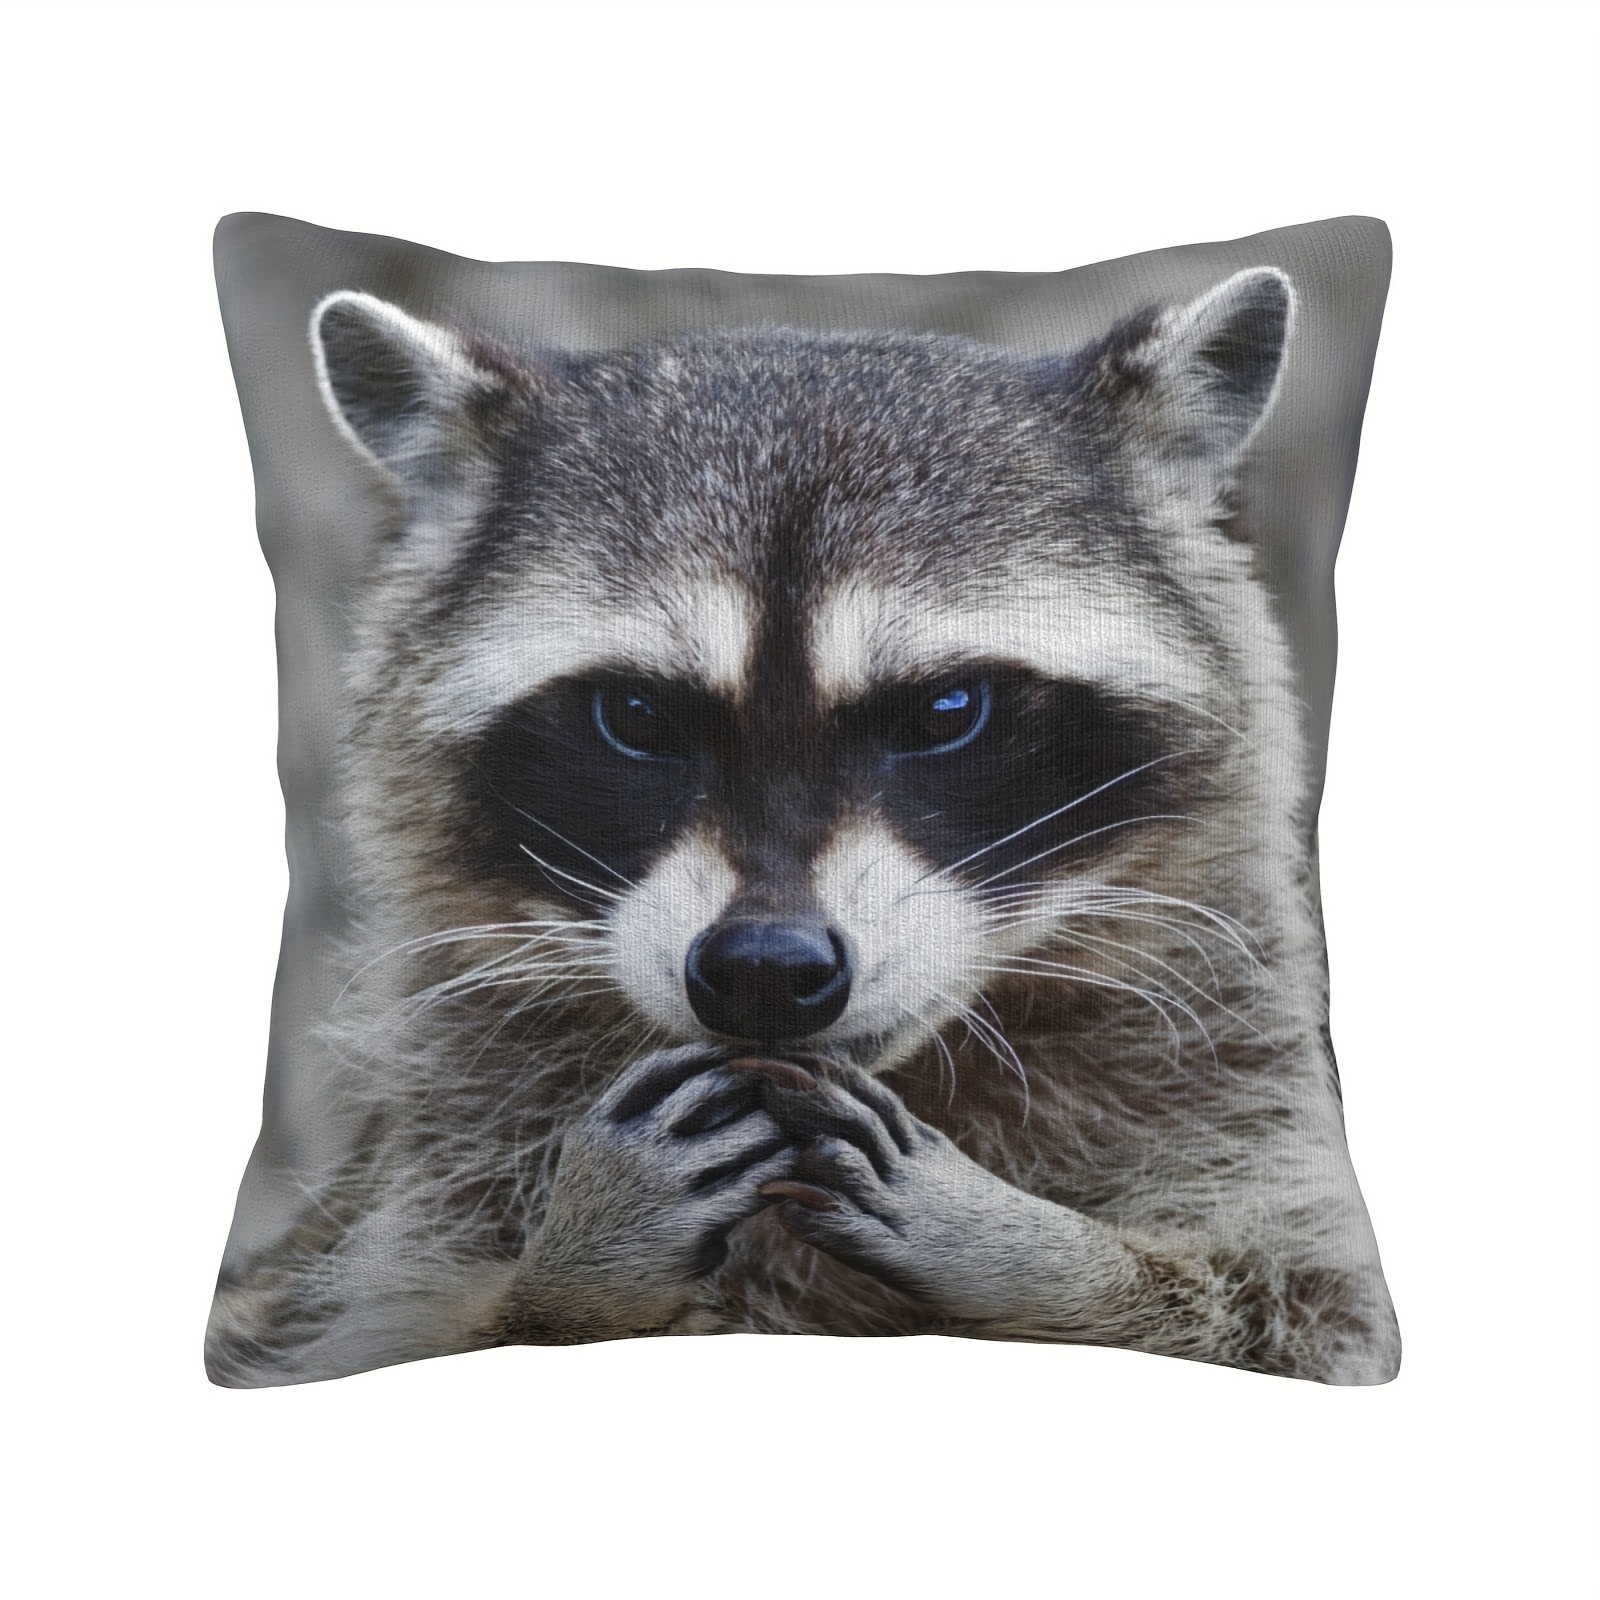 

1pc Cute Raccoon With Firm Eyes Throw Pillow Covers, Natural Forest Wild Animal Art Design Square Pillowcases For Home Decor Sofa Car Bedroom Pillow Case 18x18inch